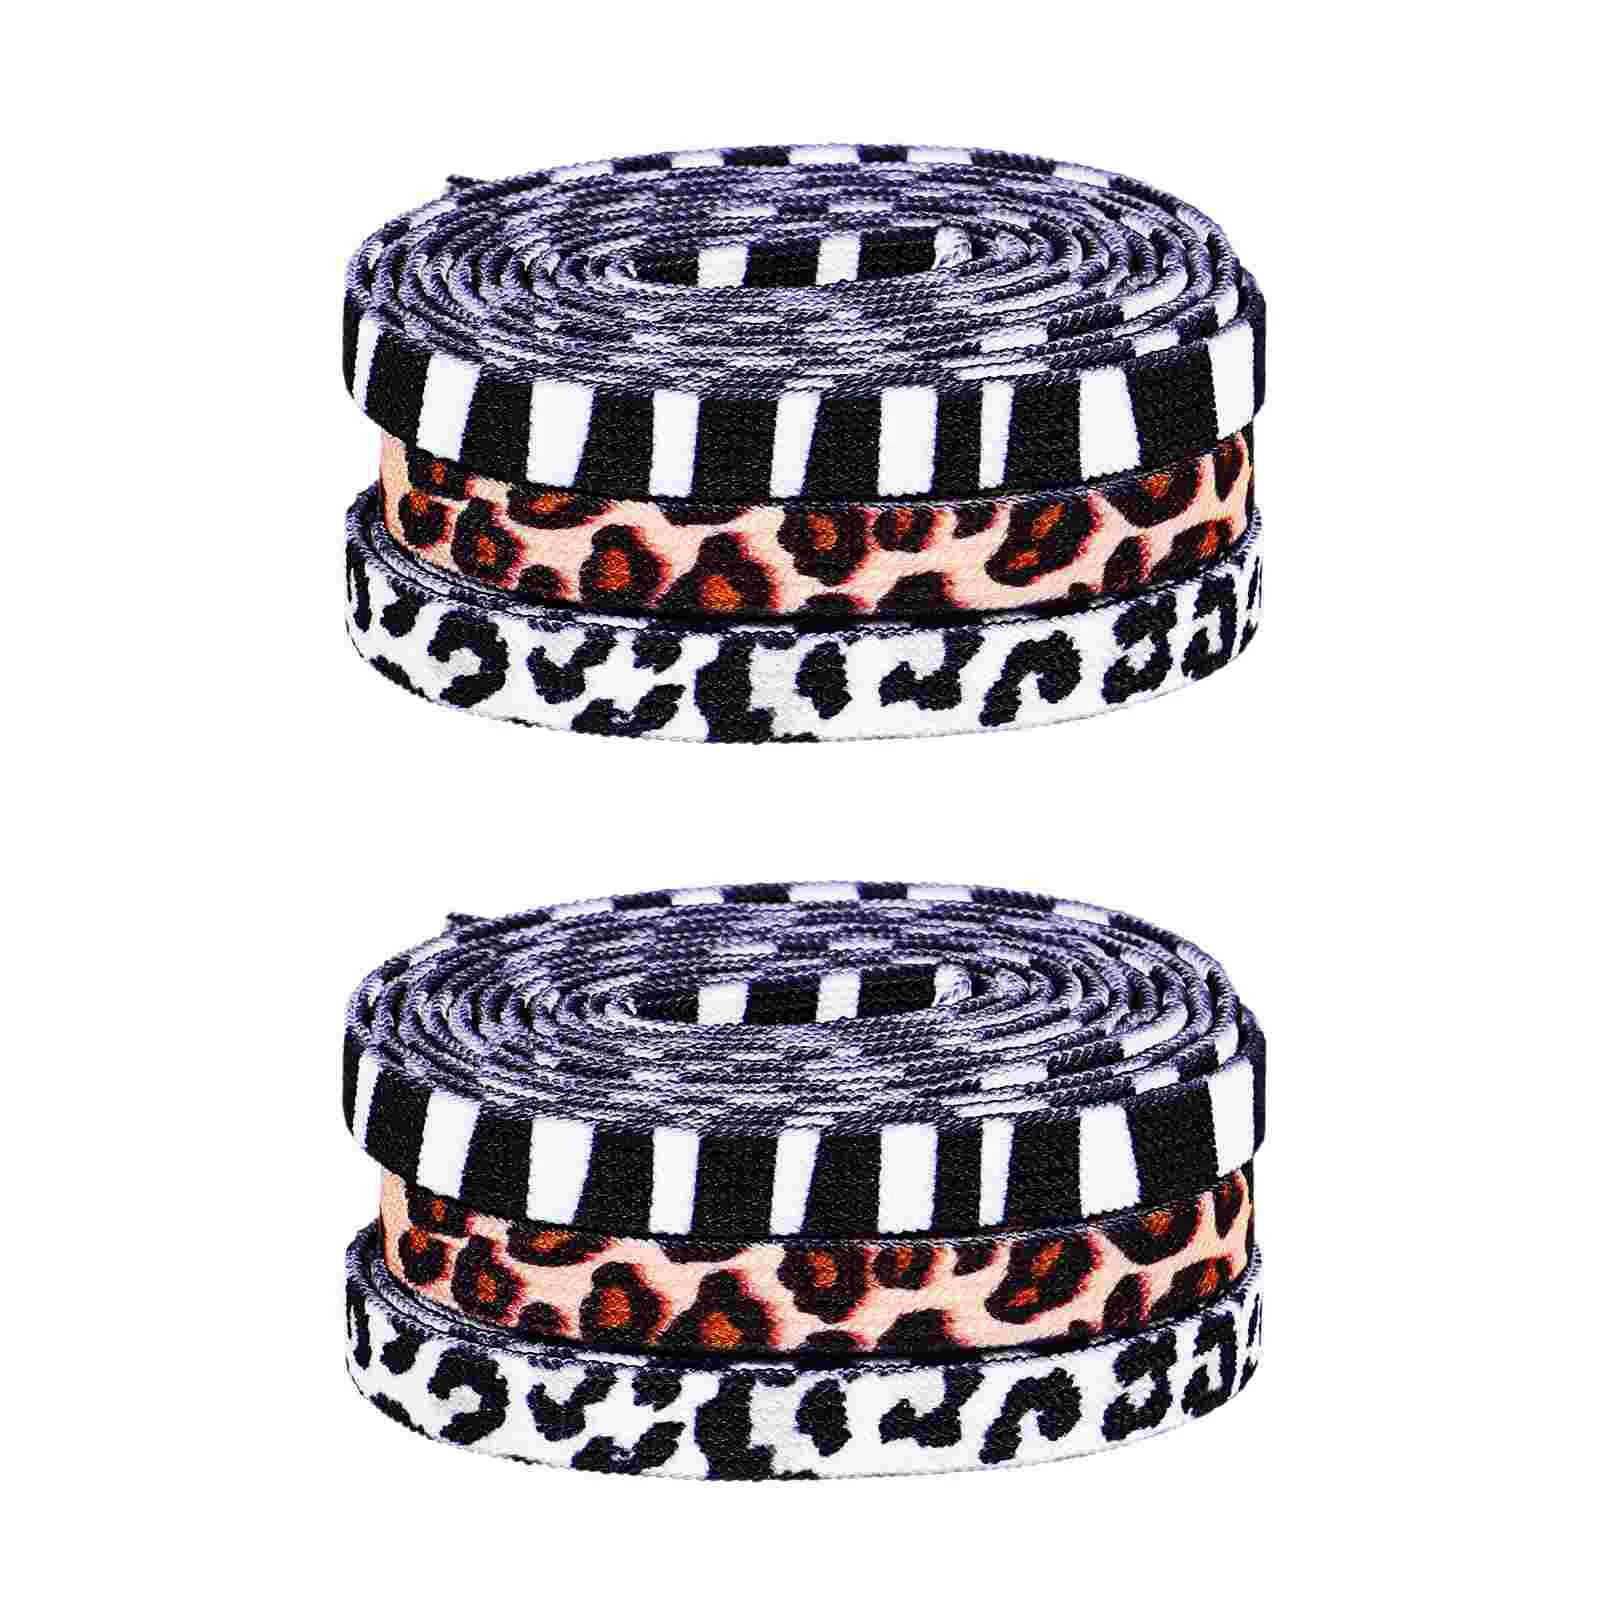 

3 Pairs Printed Shoelaces Pattern Shoelaces Zebra Leopard Cow Pattern Shoelaces for Sports Shoe Sneakers Flat Accessory